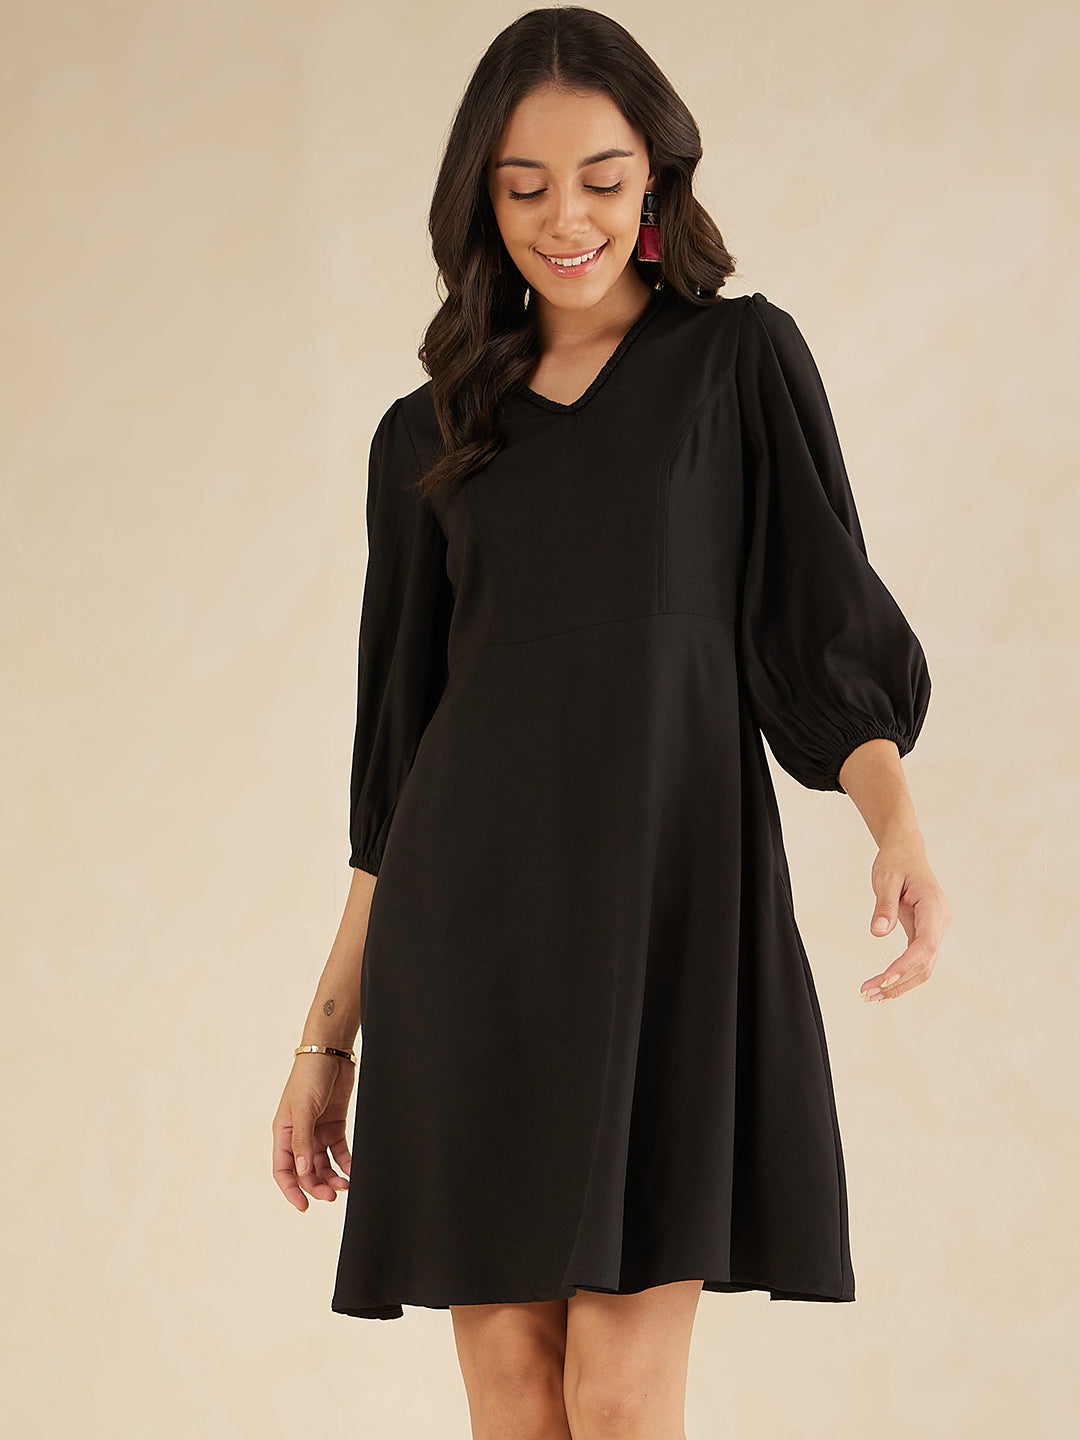 Black Fit And Flare Knee Length Dress